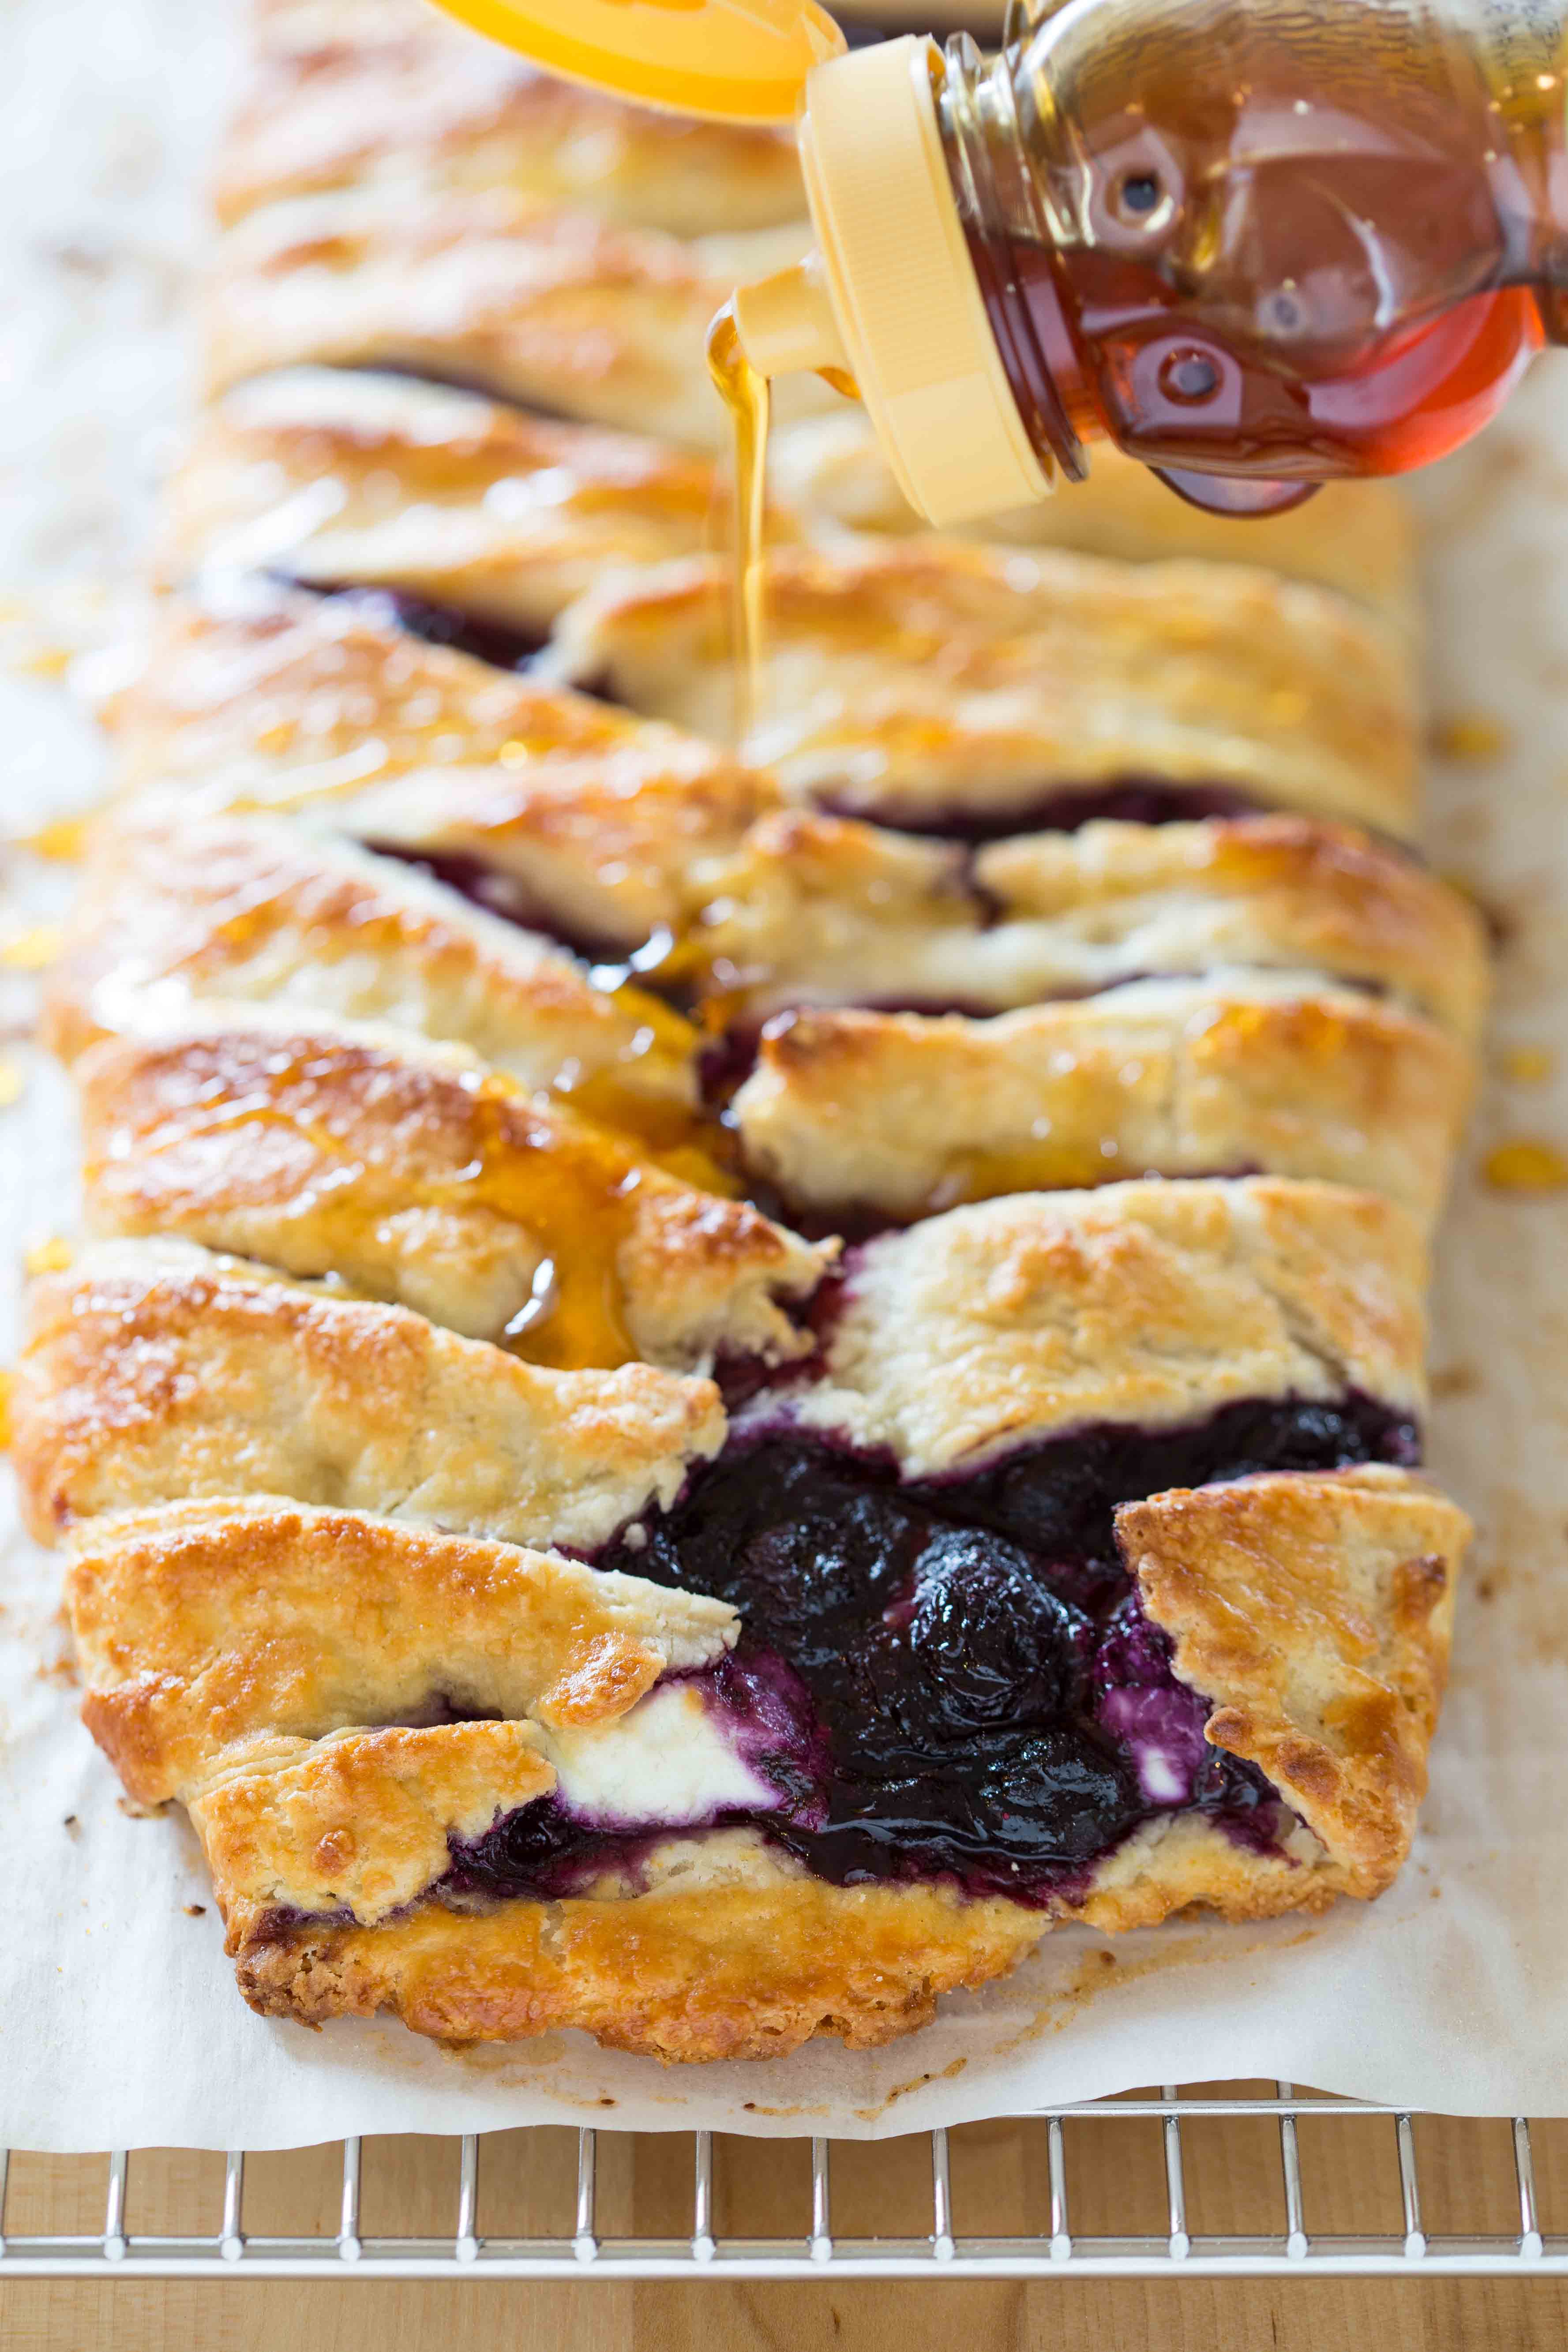 Blueberry Goat Cheese Pastry Braid